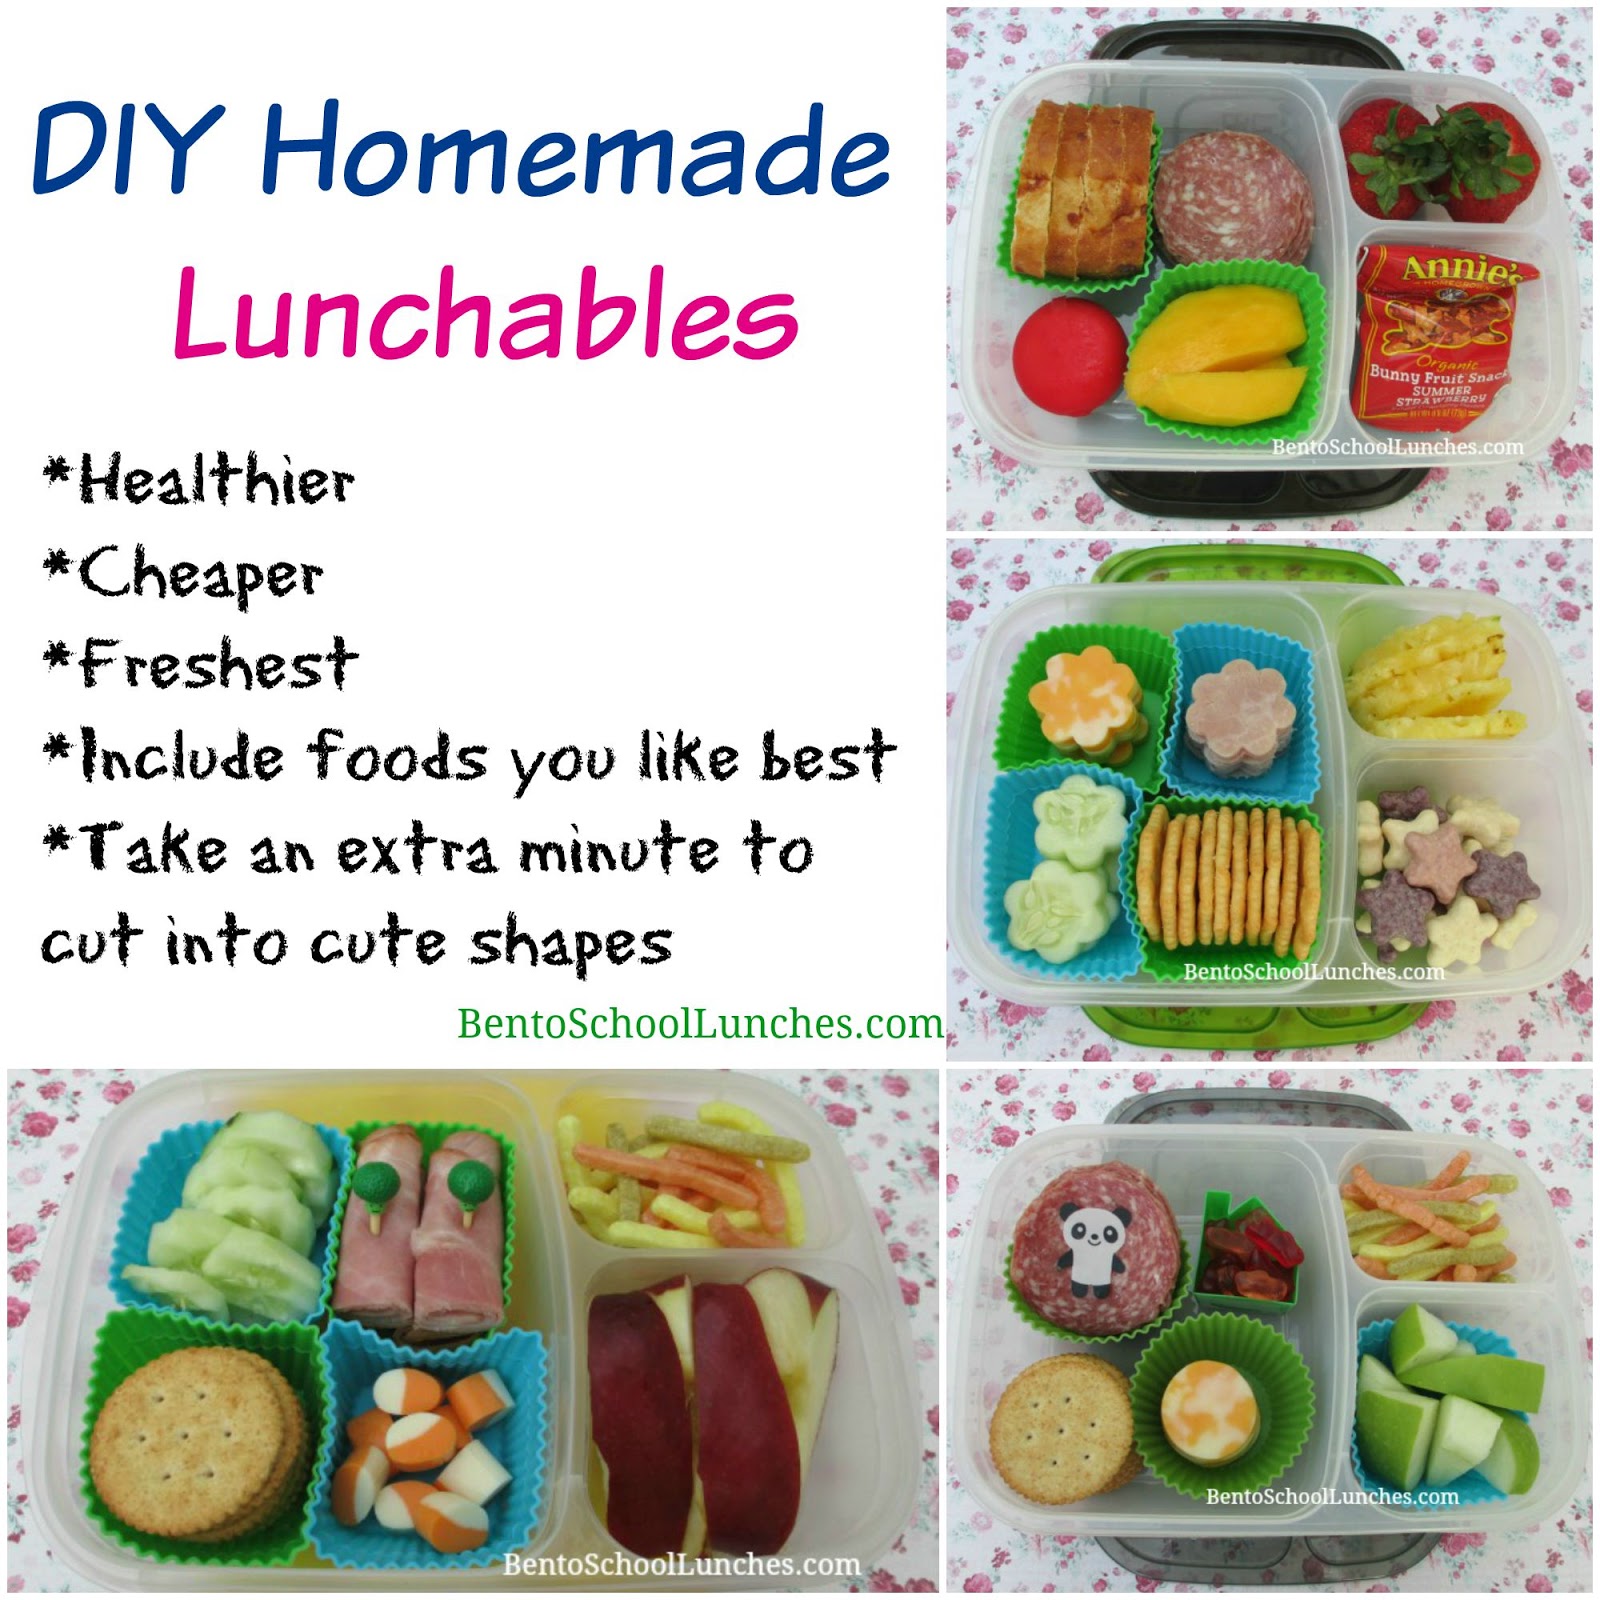 Bento School Lunches : 4 DIY Homemade Lunchables